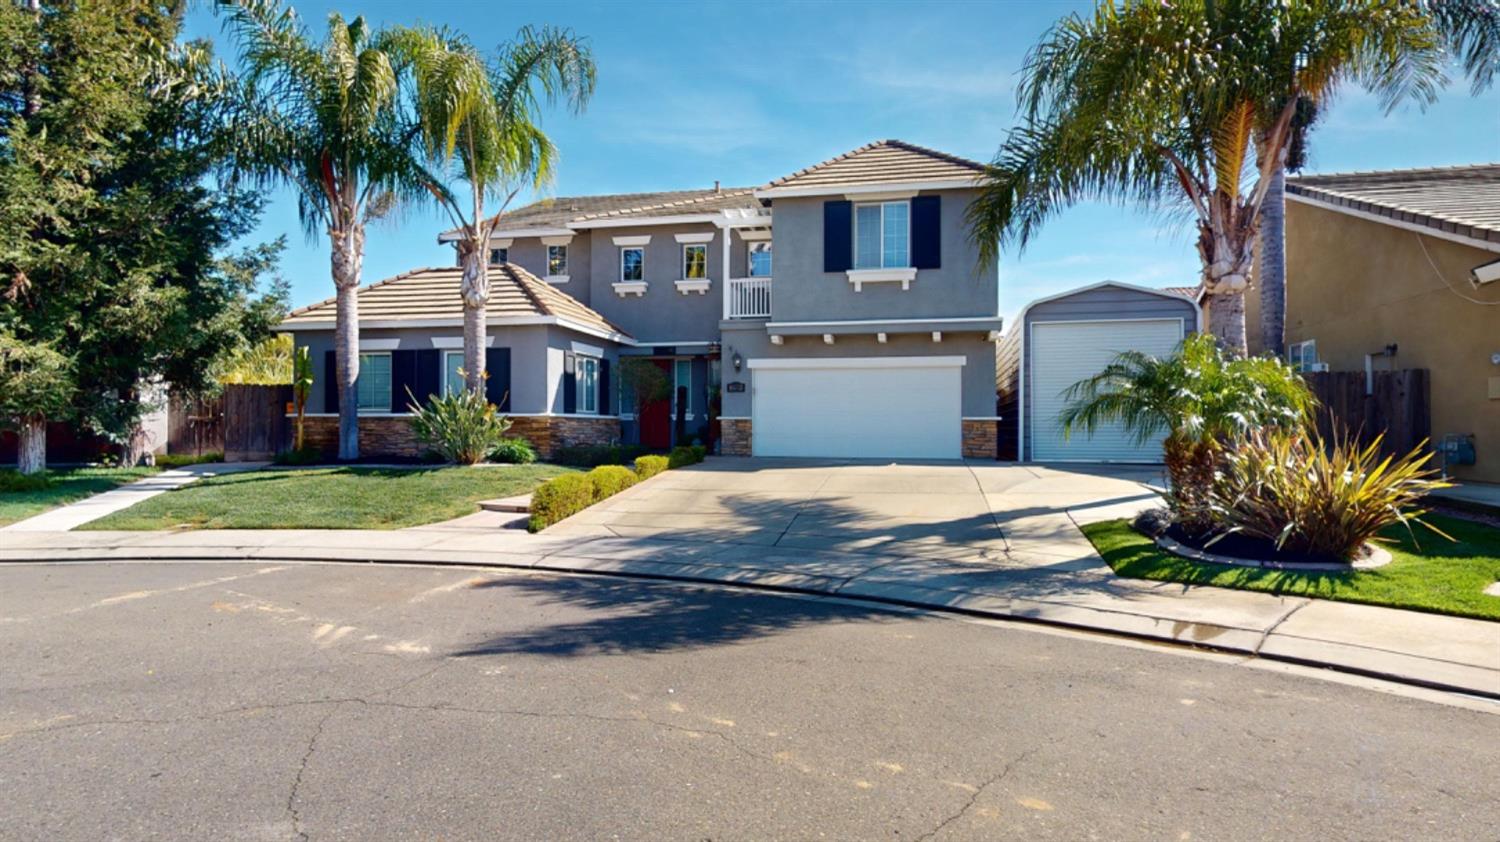 Photo of 1652 Savannah Ct in Atwater, CA